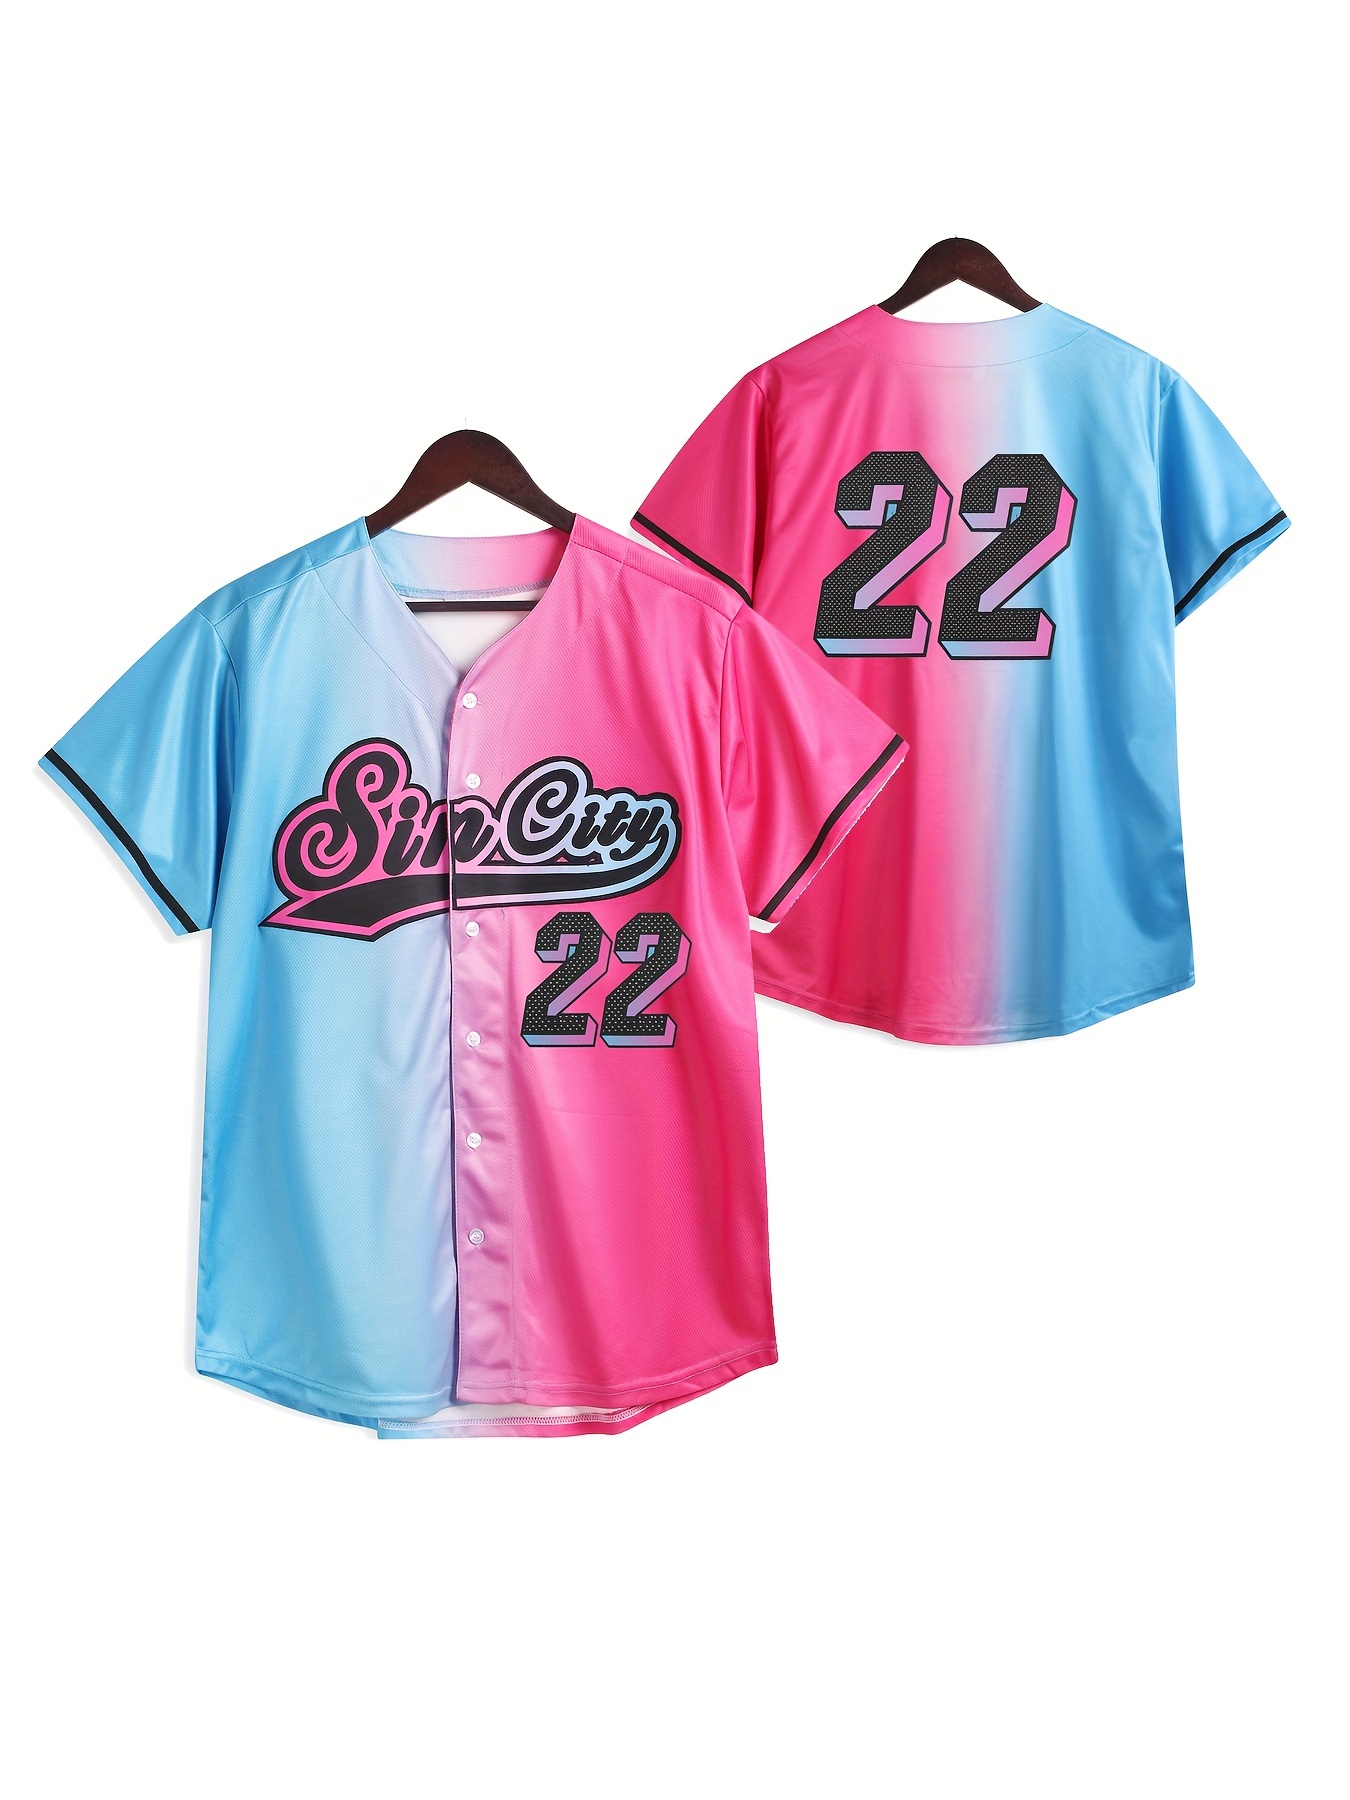 Men's Color Block #22 Baseball Jersey, Fashion Short Sleeve Baseball Shirt, Breathable Embroidery Button Up Sports Uniform for Training Competition